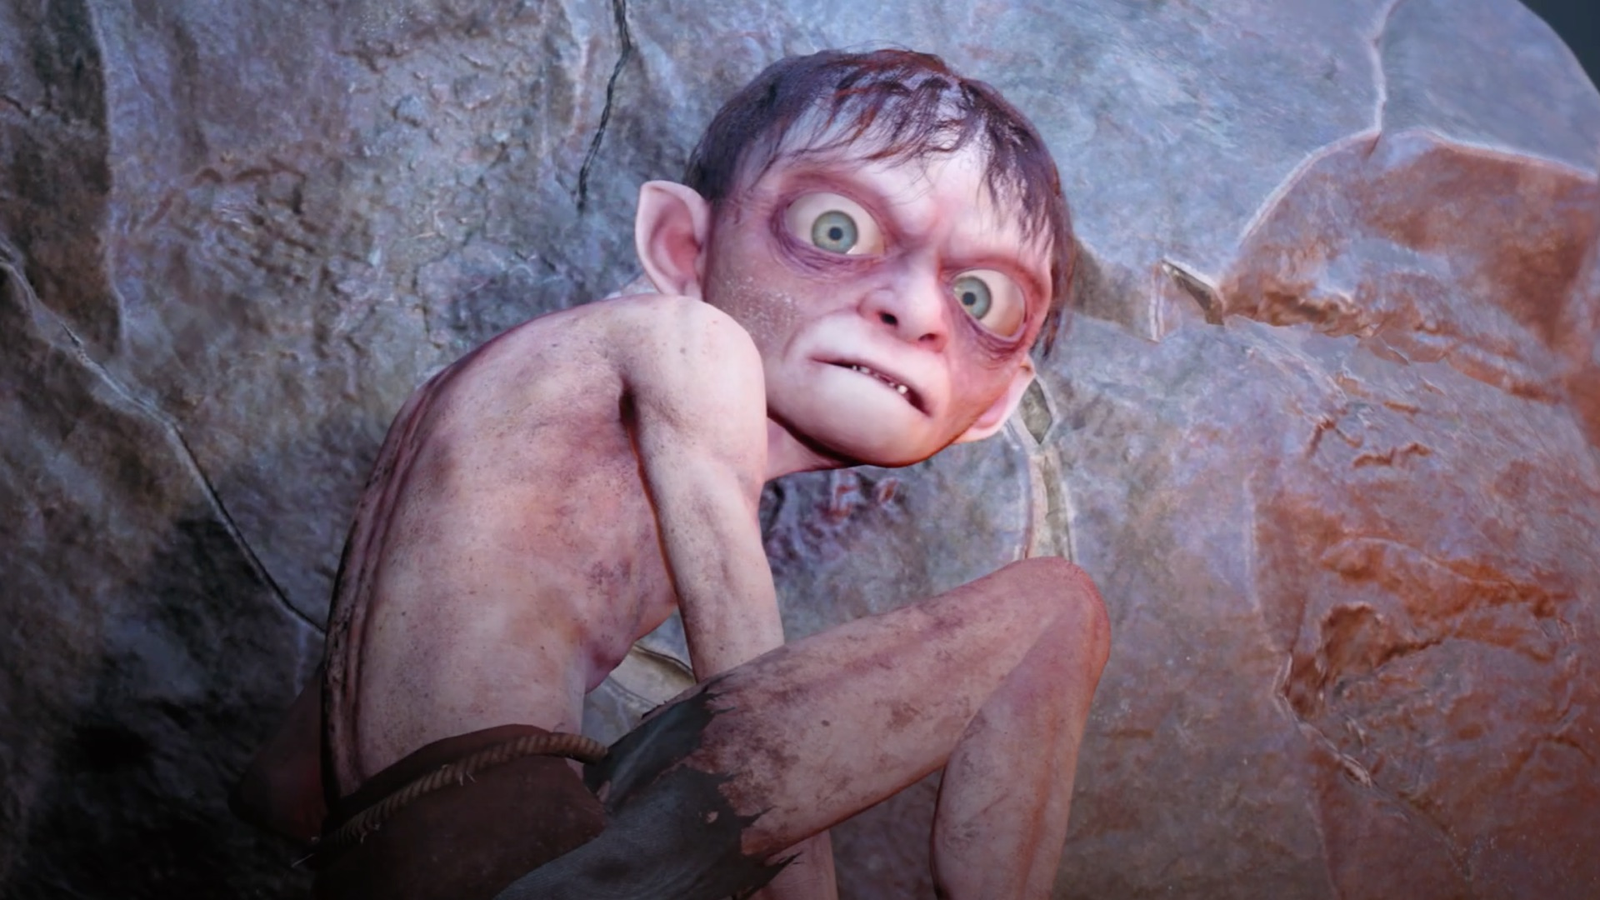 List Of Characters Revealed So Far In Lord Of The Rings: Gollum - N4G